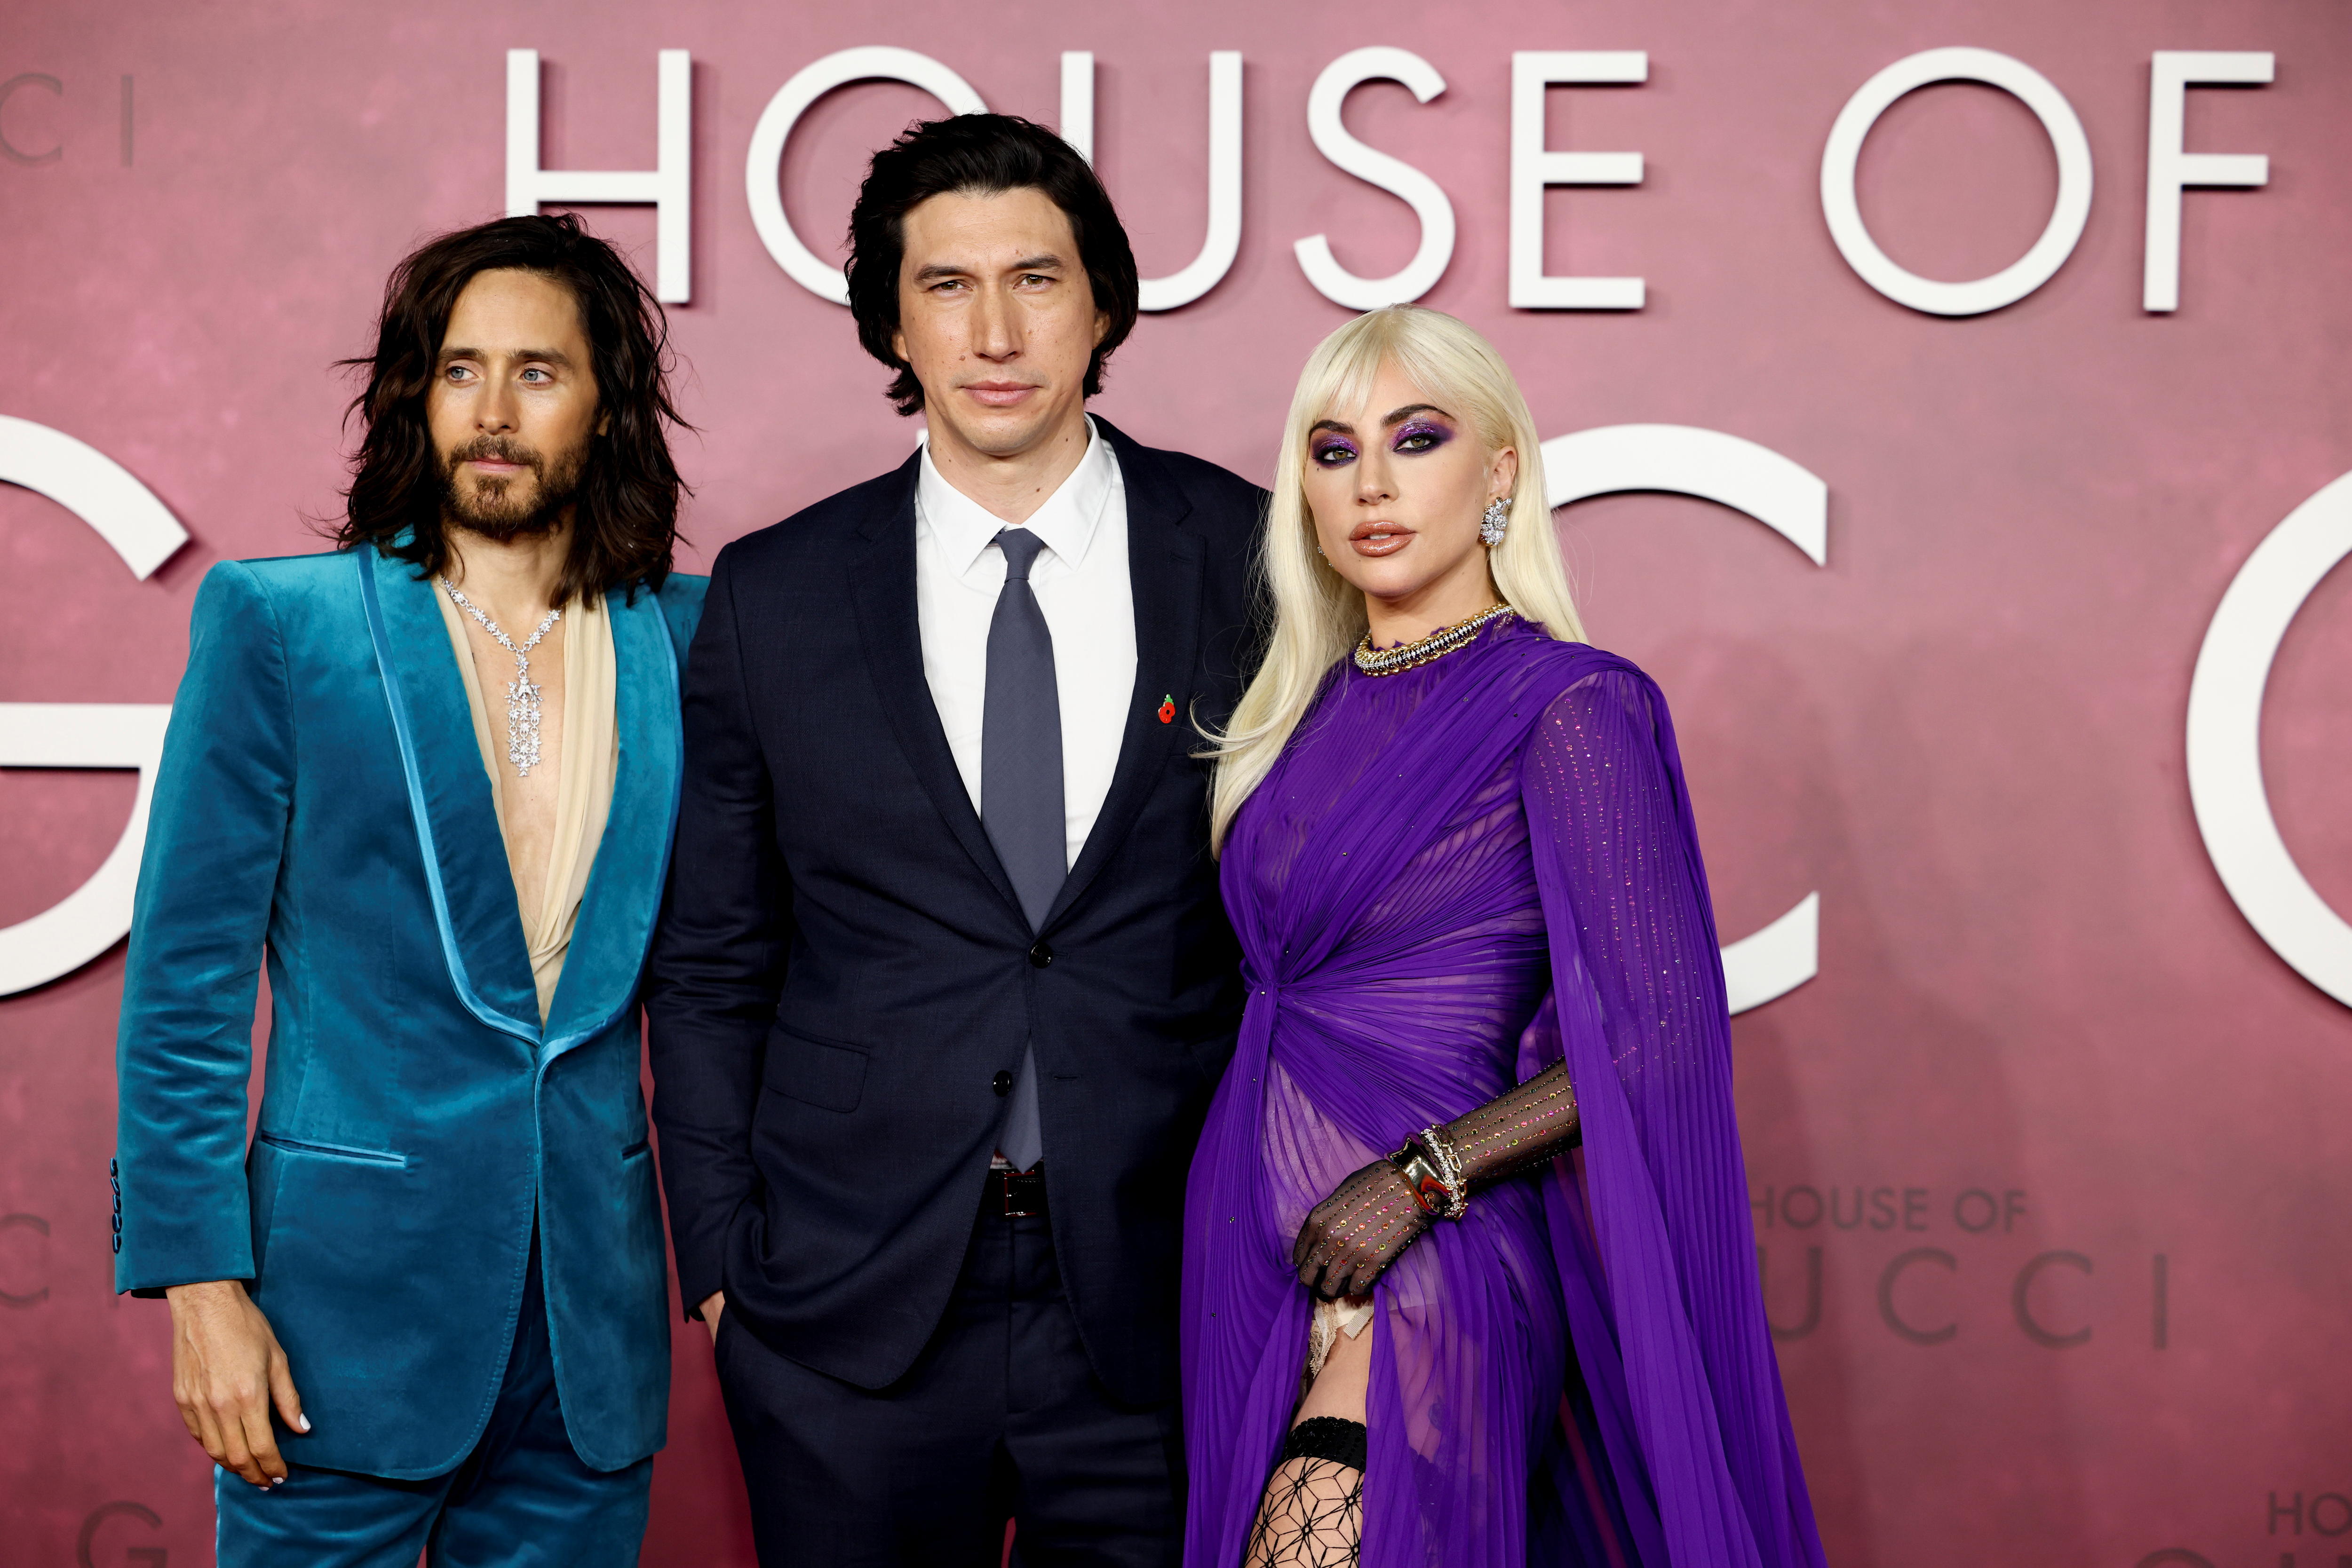 Cast members Jared Leto, Adam Driver, and Lady Gaga arrive at the premiere of House of Gucci at Leicester Square in London.